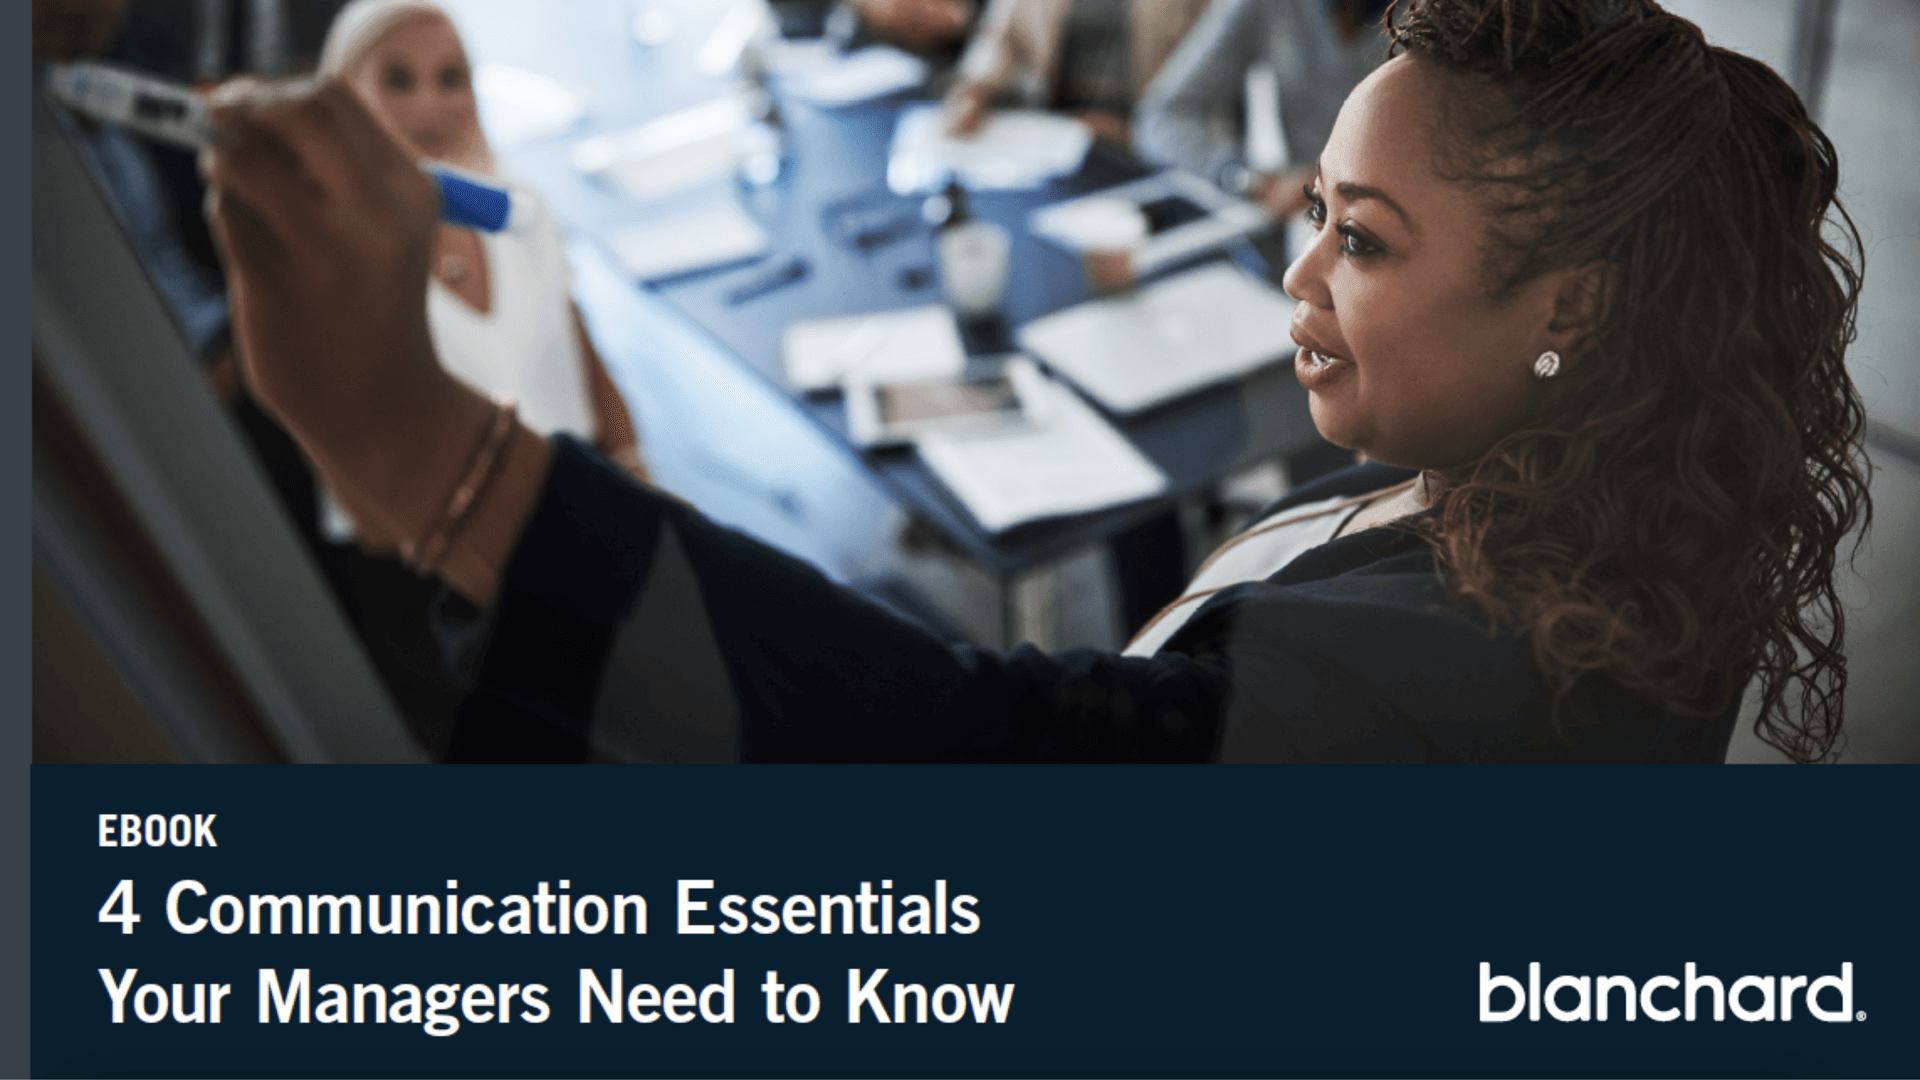 Ressources 4 Communication Essentials Your Managers Need to Know